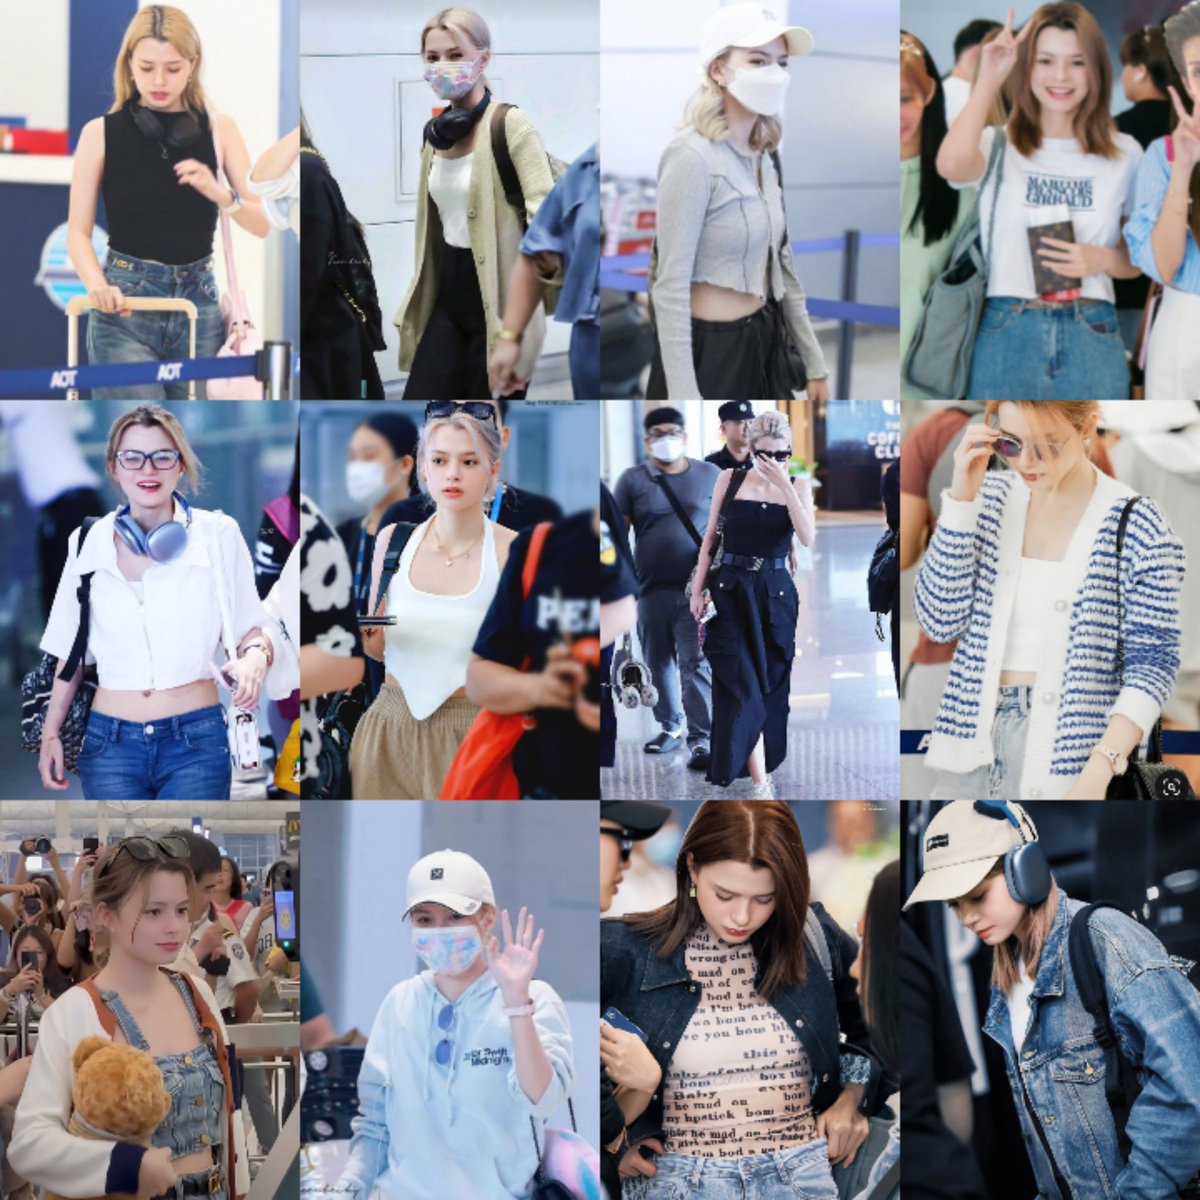 Make a thing, #BeckyArmstrong the pioneer in Thai airport fashion viral~ 🔥🔥

#Beckysangels